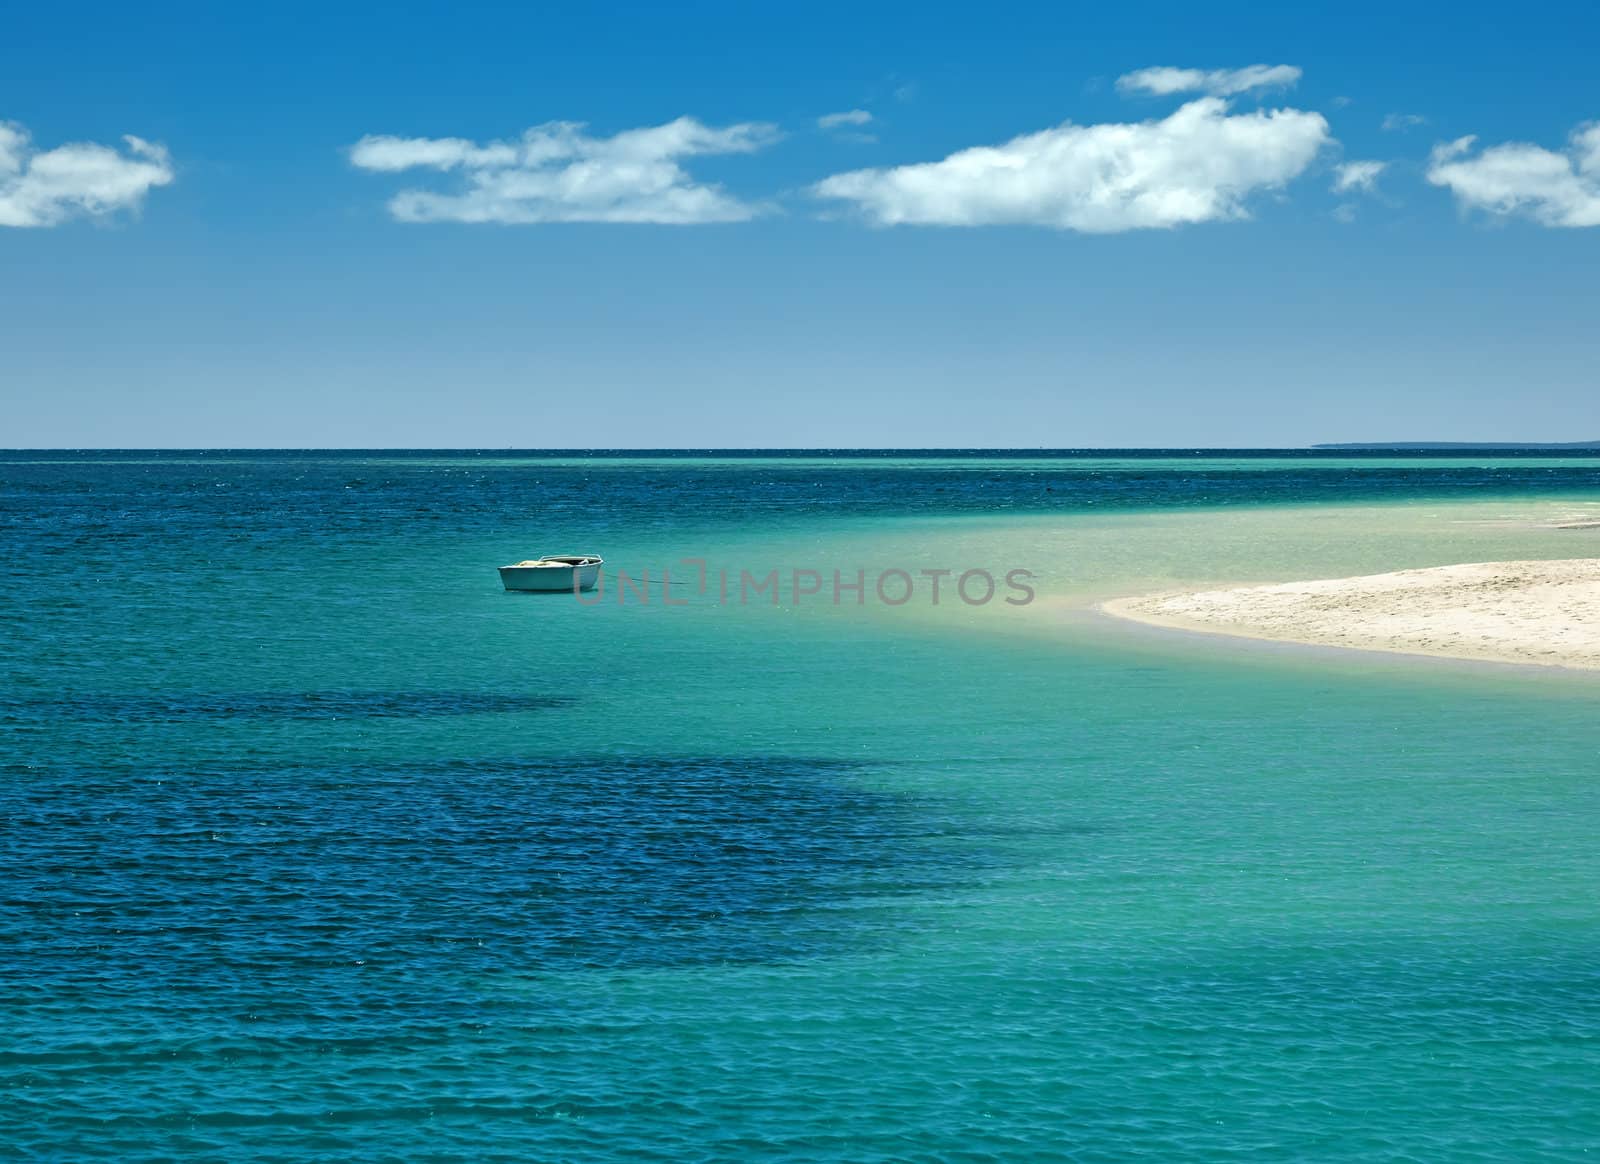 An image of a lonely boat at the beach